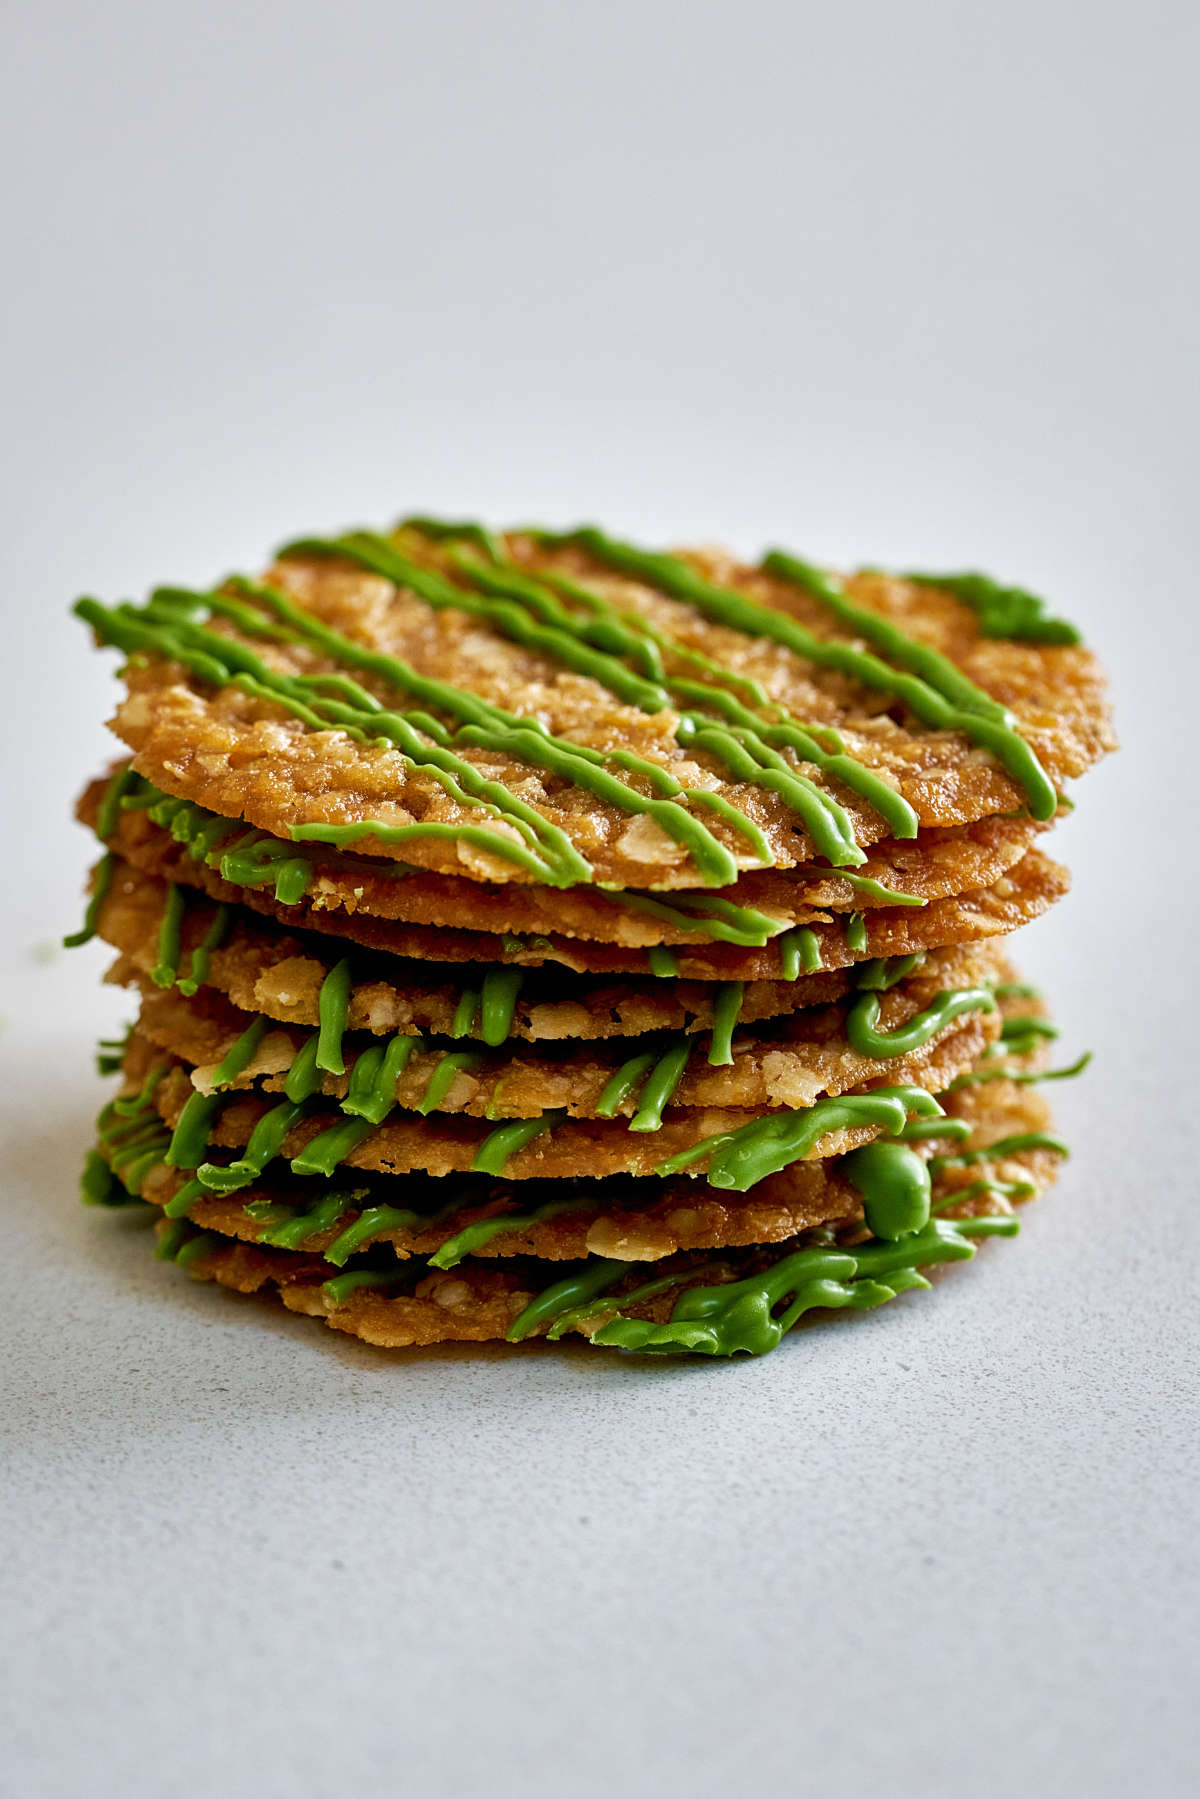 Stack of lace cookies with green chocolate drizzle.